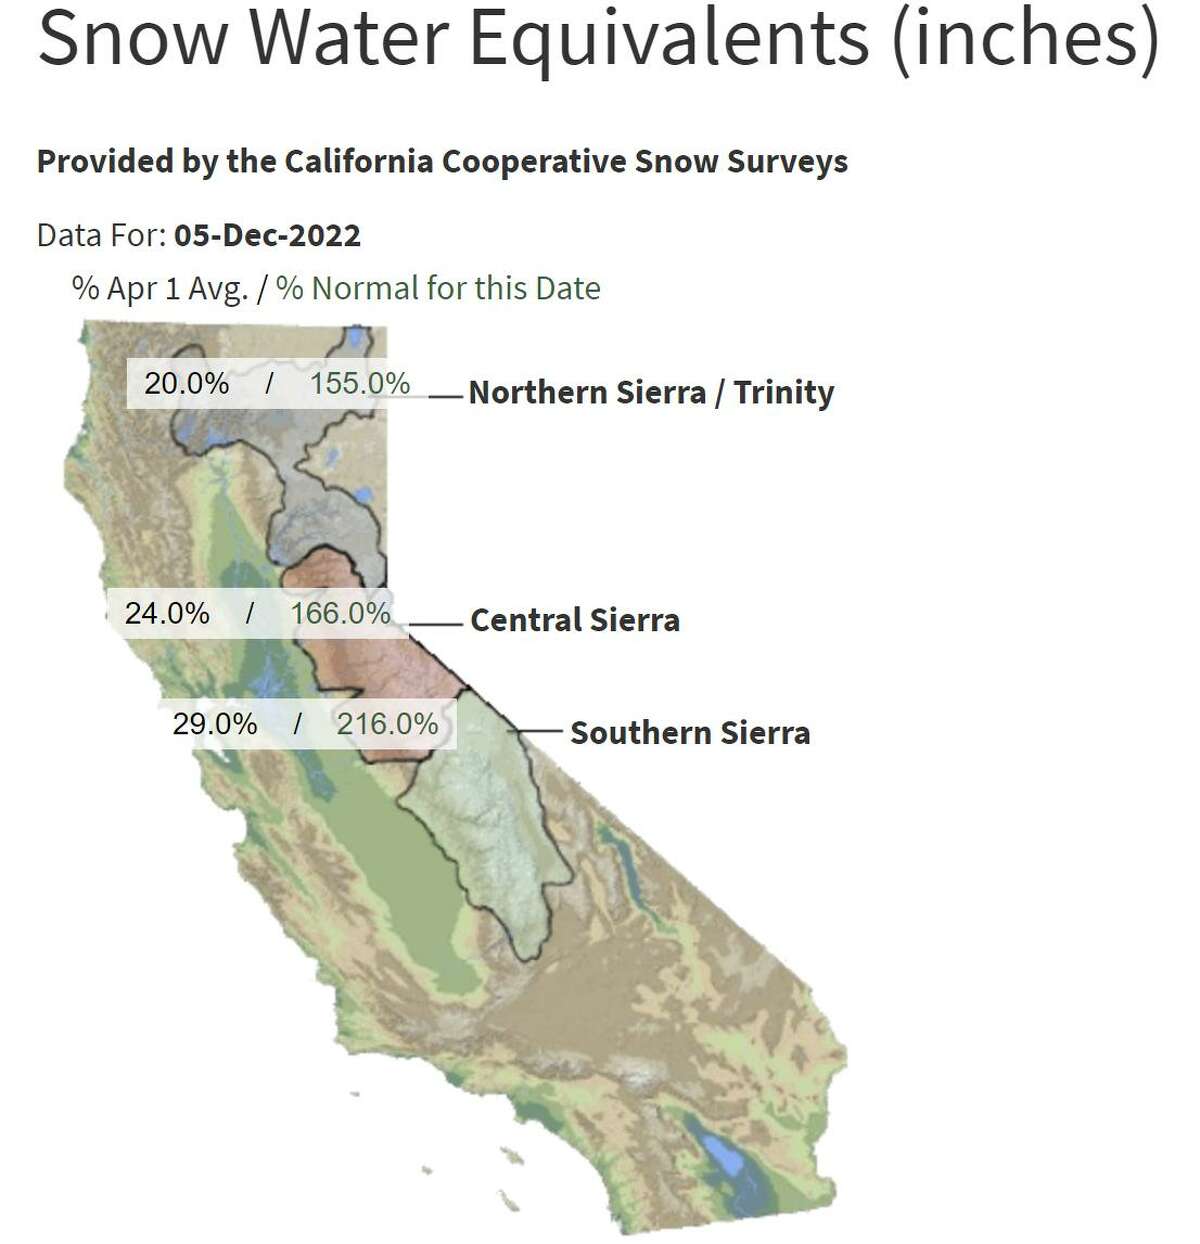 Sierra snowpack is over 100% above normal for this time of year